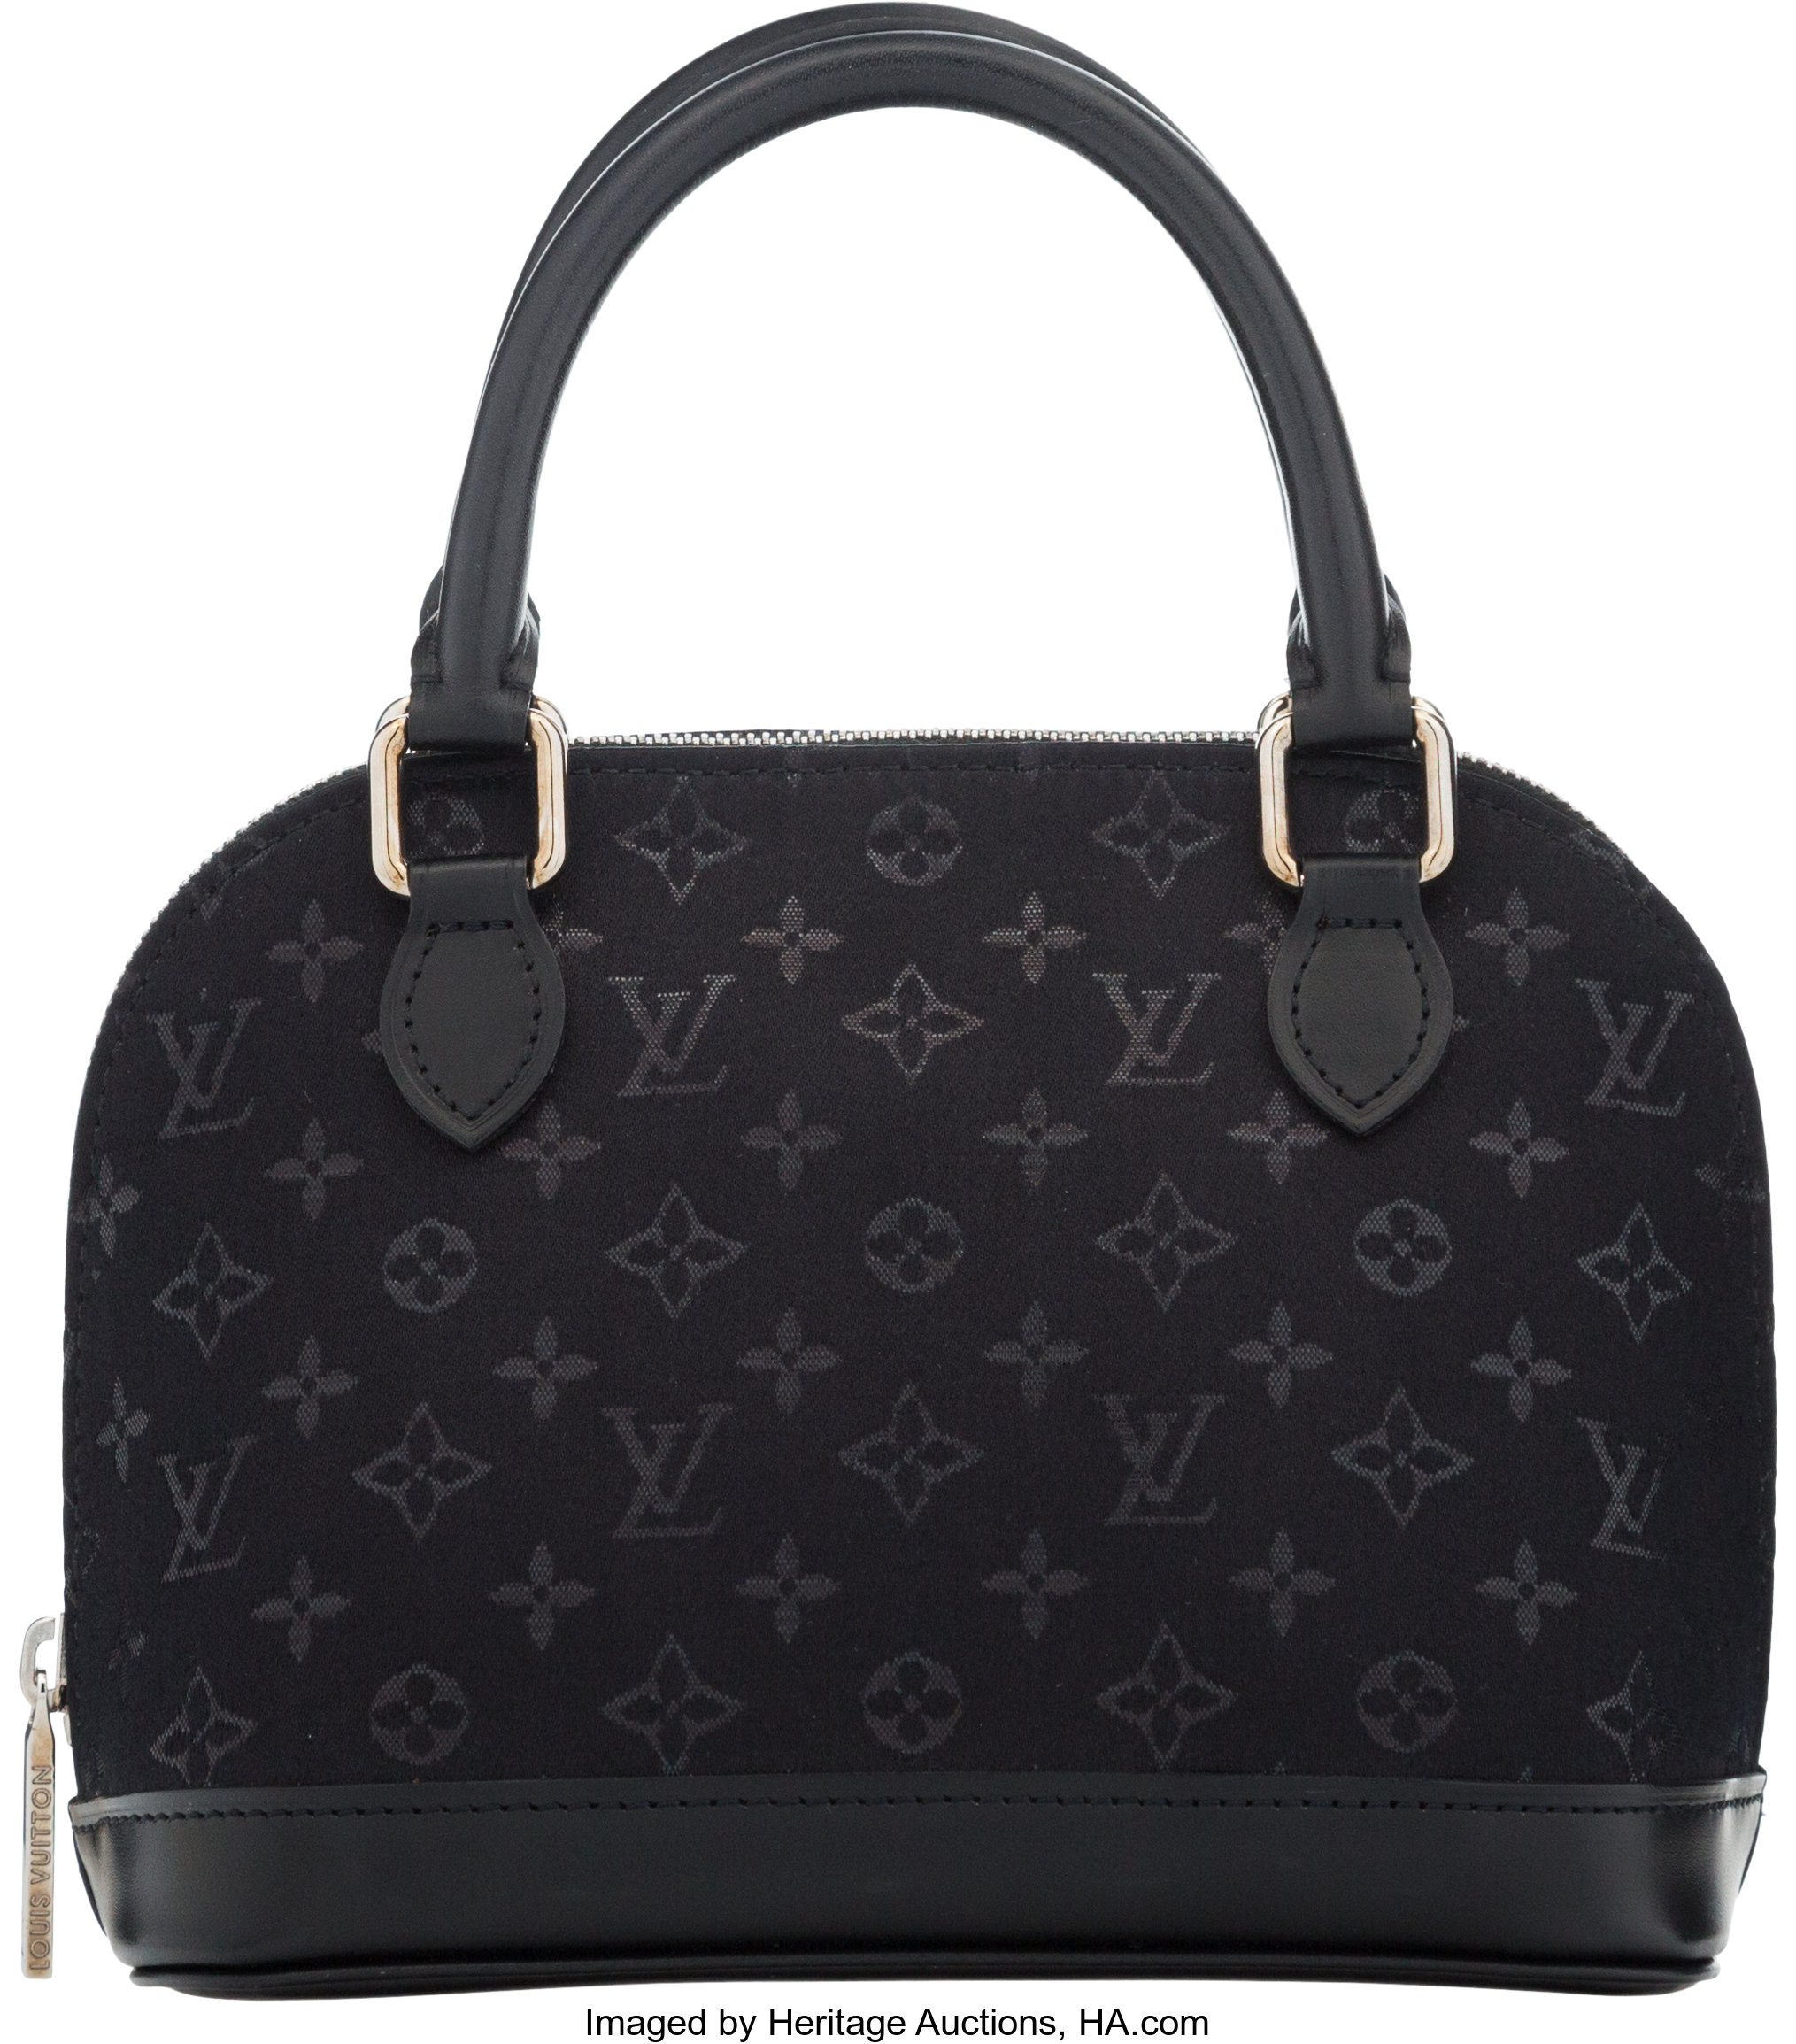 Smaller Black Louis Vuitton - 403 For Sale on 1stDibs  louis vuitton purse  small black, small black louis vuitton bag, louis vuitton small black purse